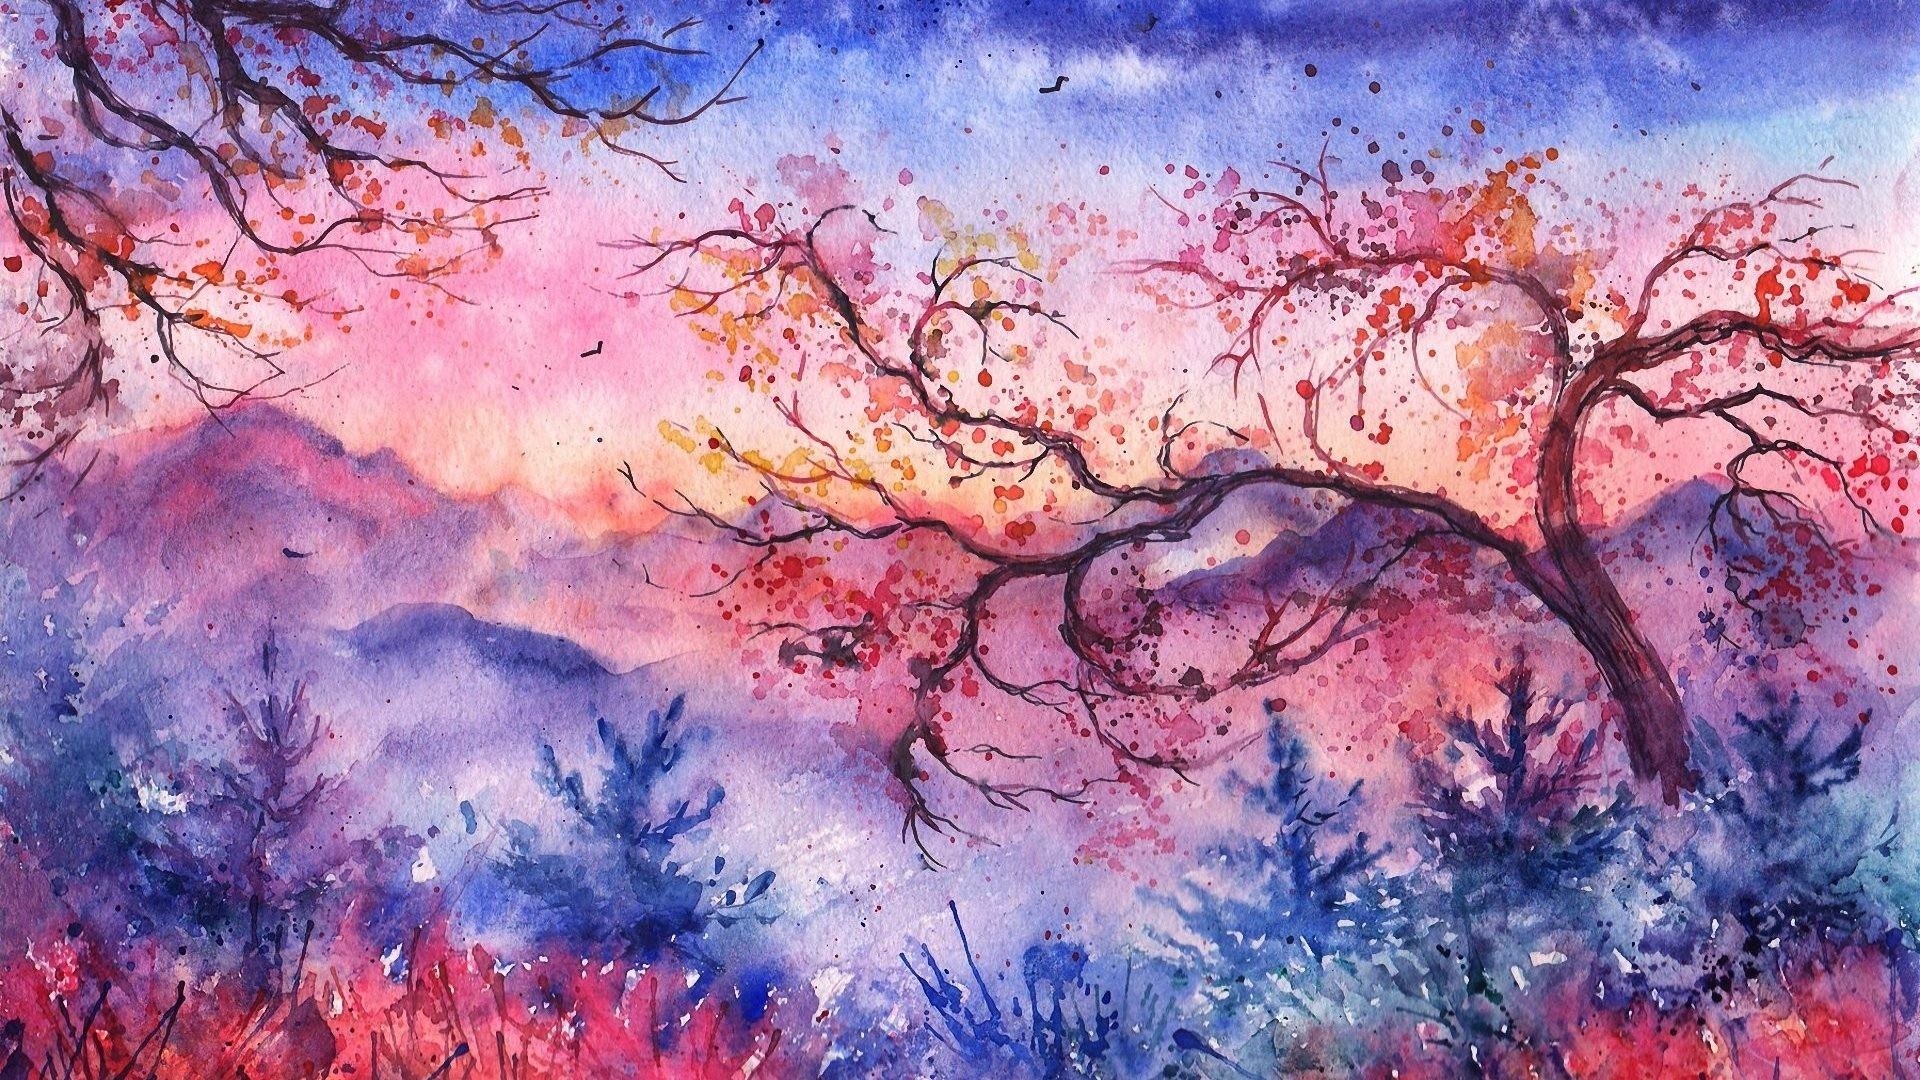 1920x1080 Evening Tag - Christmas Landscape Trees Foliage Watercolor Birds Painted  Evening Sunset Mountains Abstract Nature Wallpaper